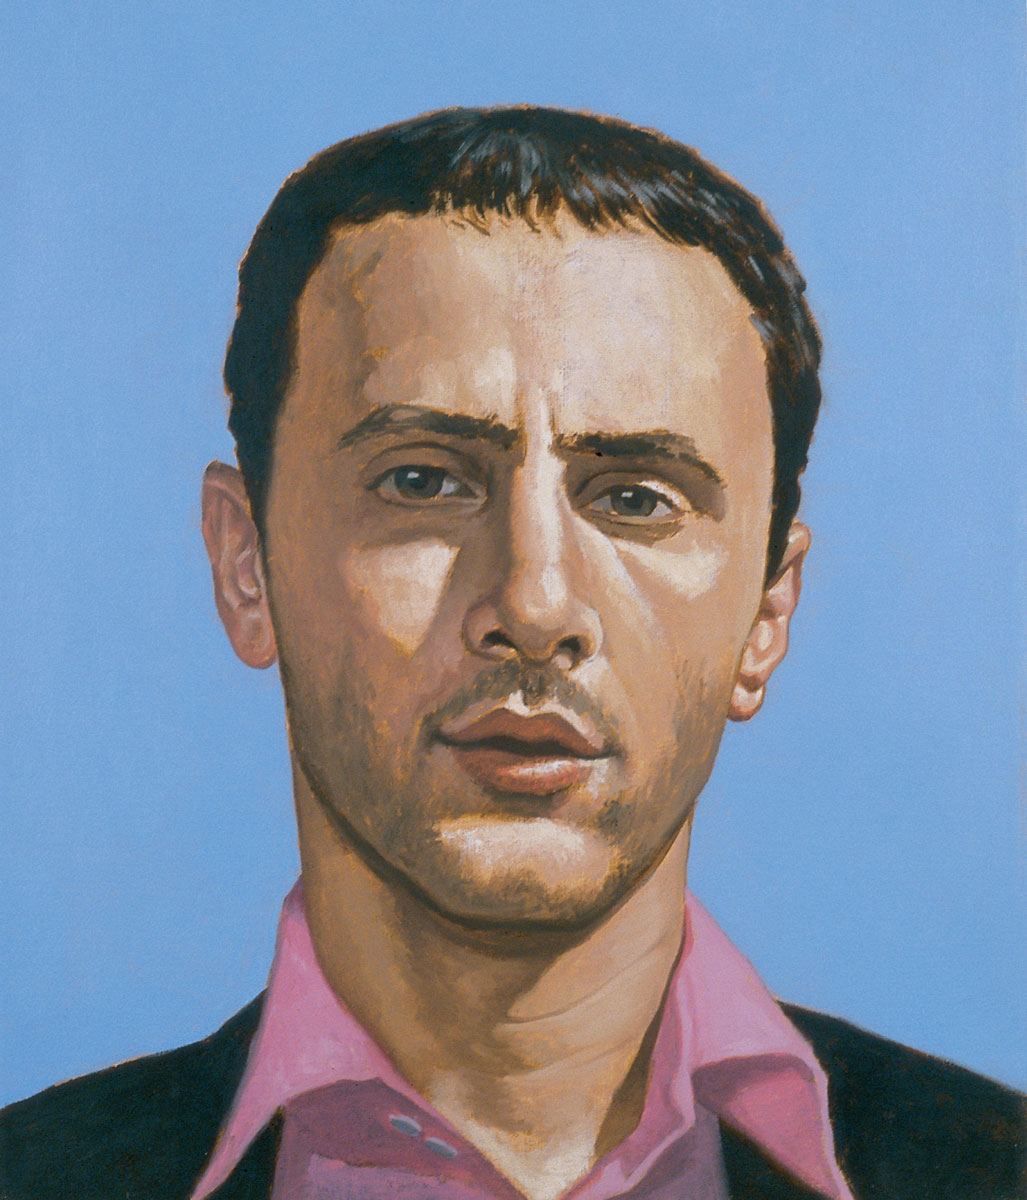 A 2001 painting by Peter Rostovsky entitled “I’m a 32-yr-old Californian; Anglo/Spaniard mix, short dark straight hair, 5'10